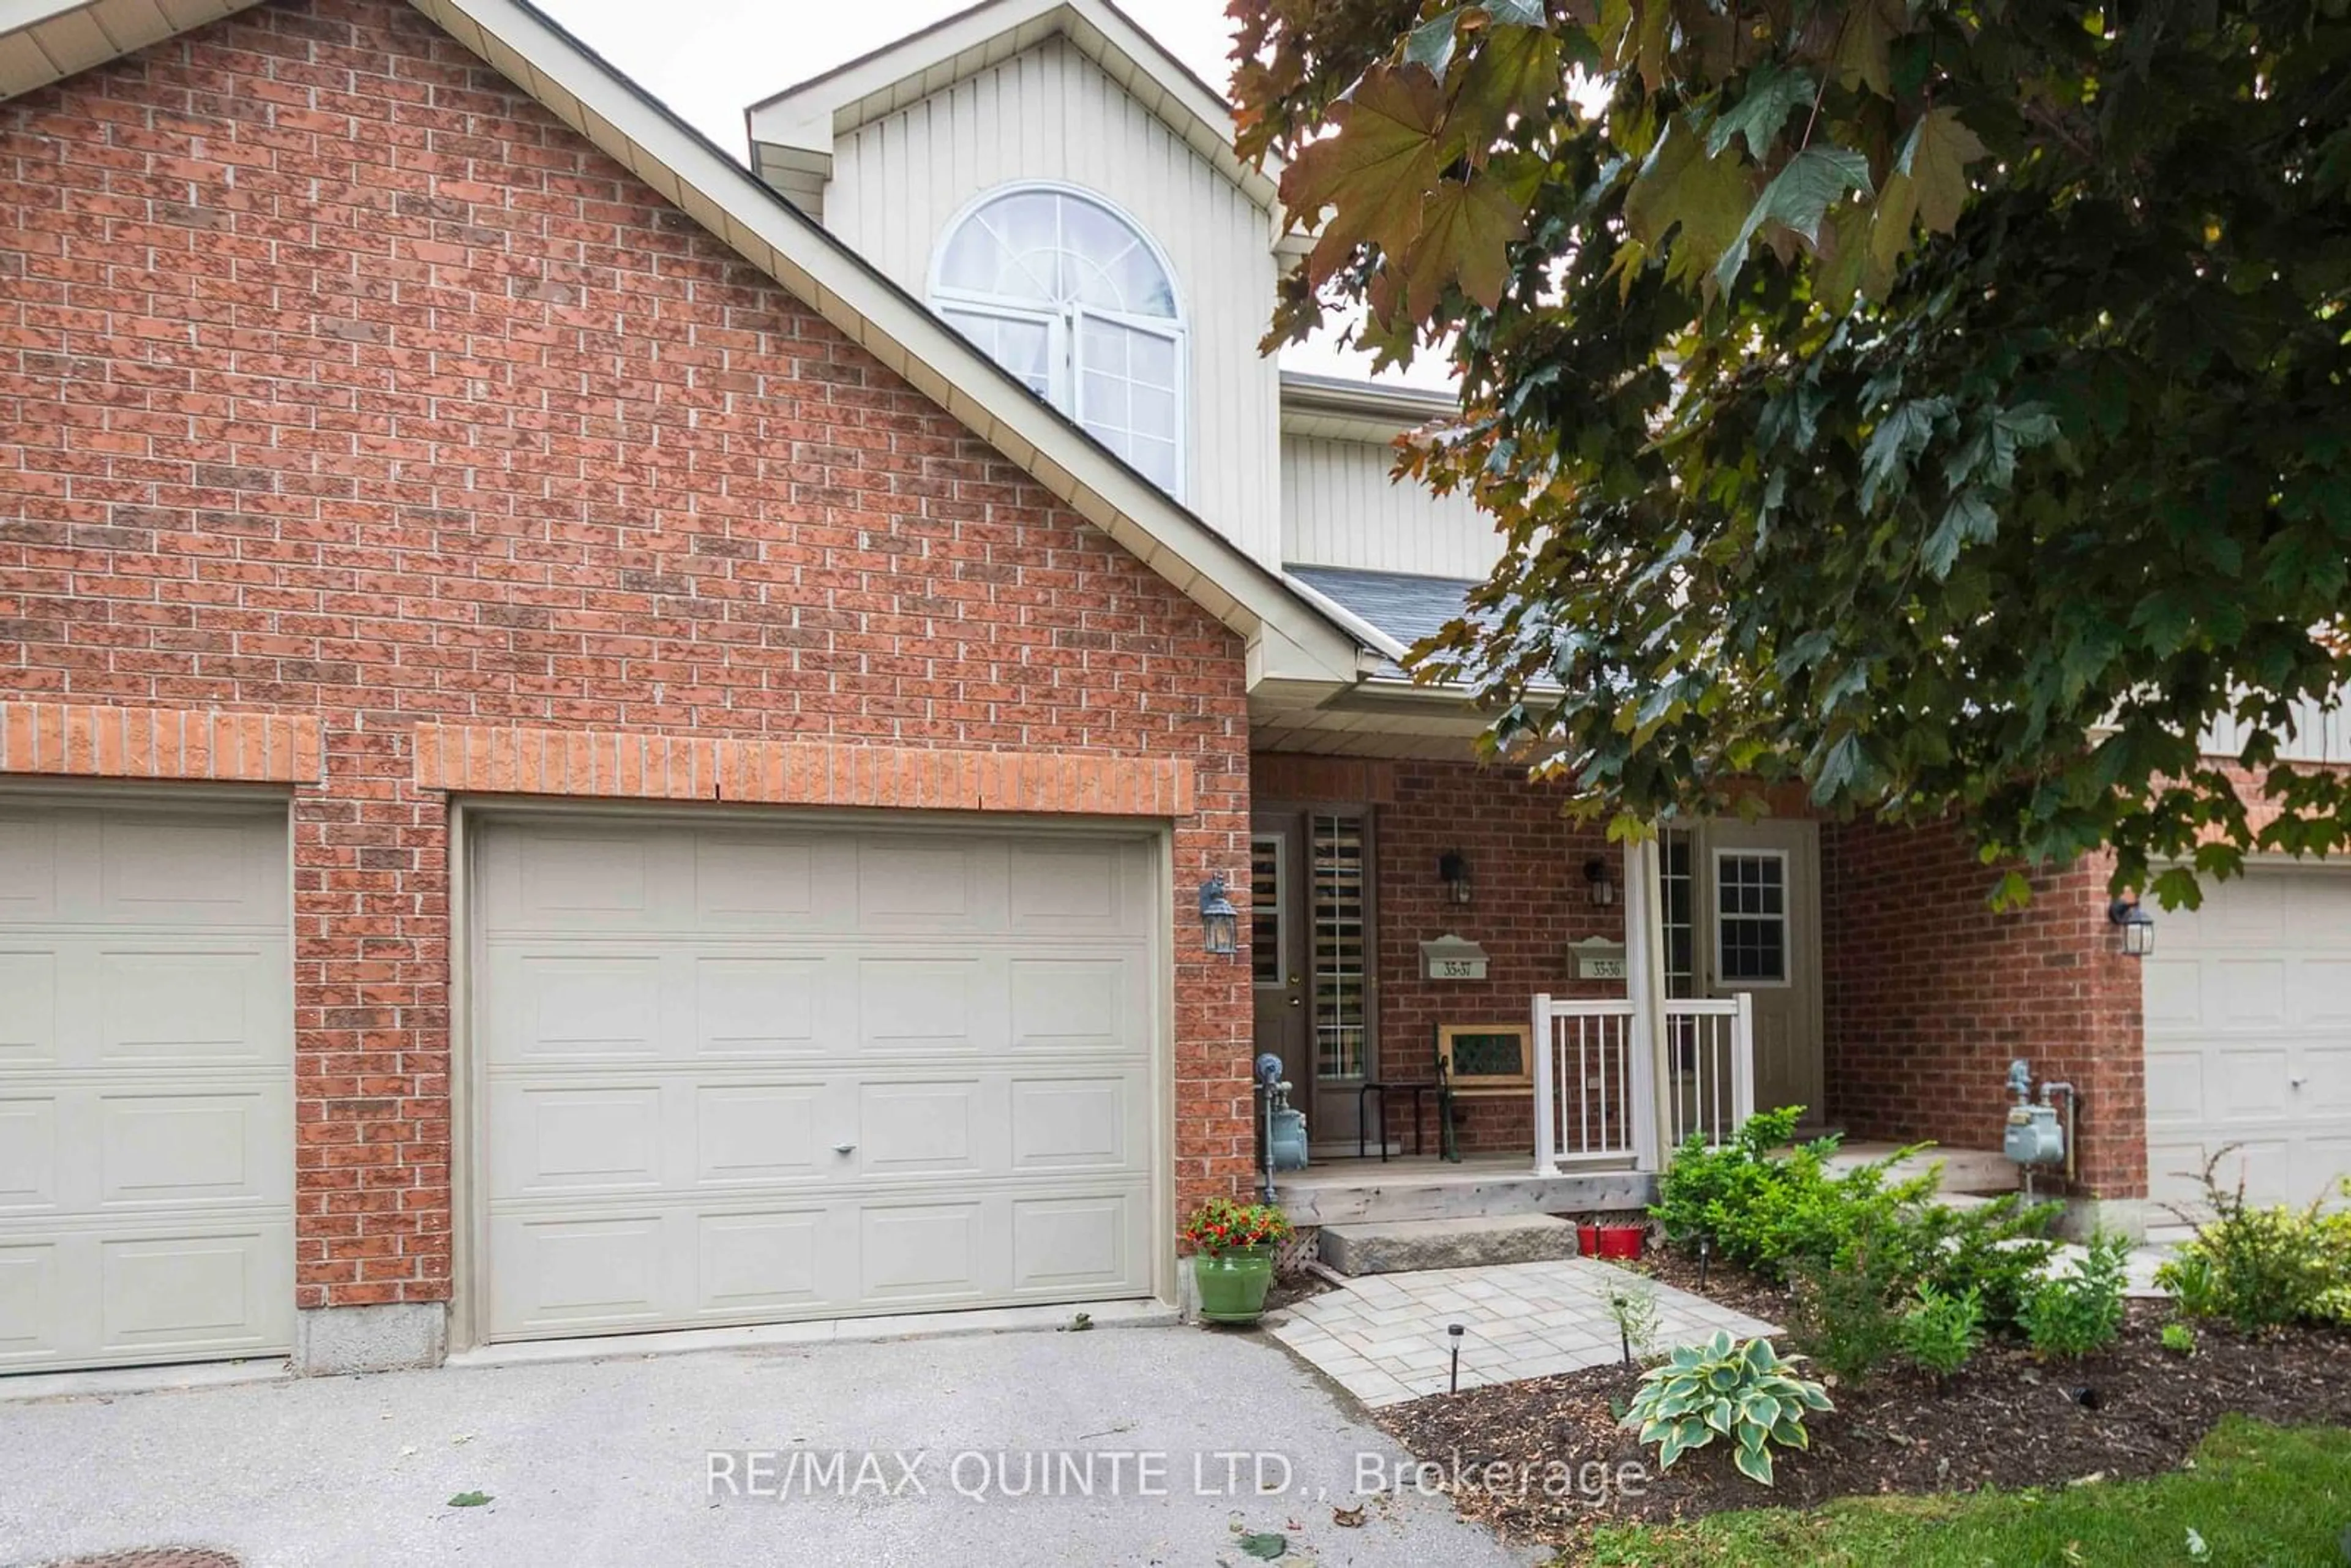 Home with brick exterior material for 35 Albion St ##37, Belleville Ontario K8N 5Y8